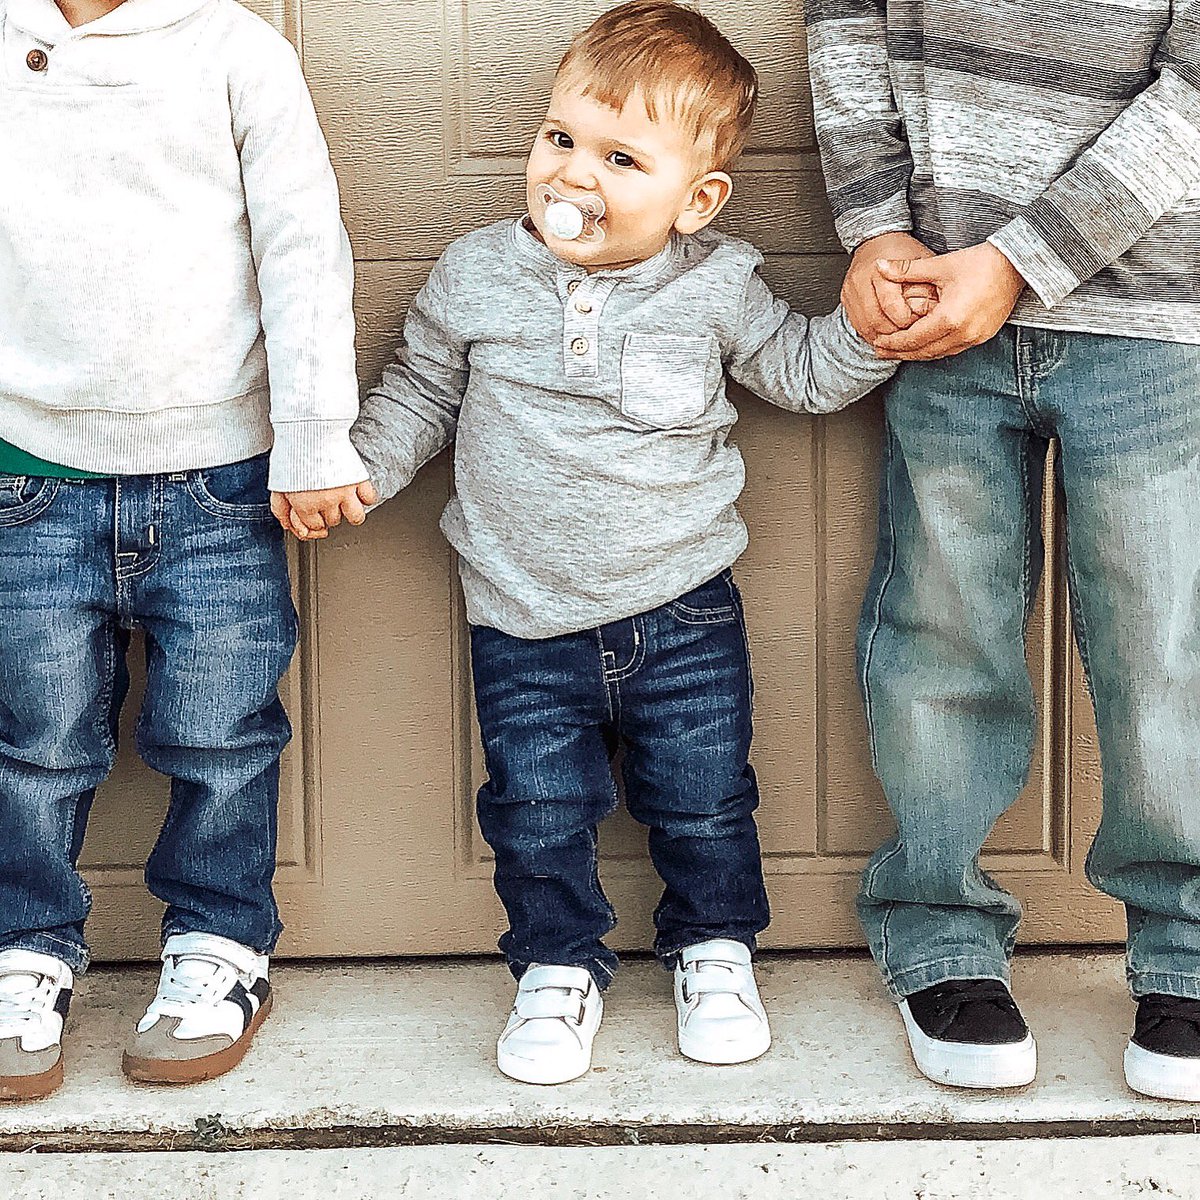 When you’re wearing your first pair of jeans and you know you look good 😍 My little dudes were in serious need of new jeans this year and @jcpenney was the one stop shop that covered all of them,and best of all, jeans for our whole family didn’t break the bank #ad #AllAtJCP